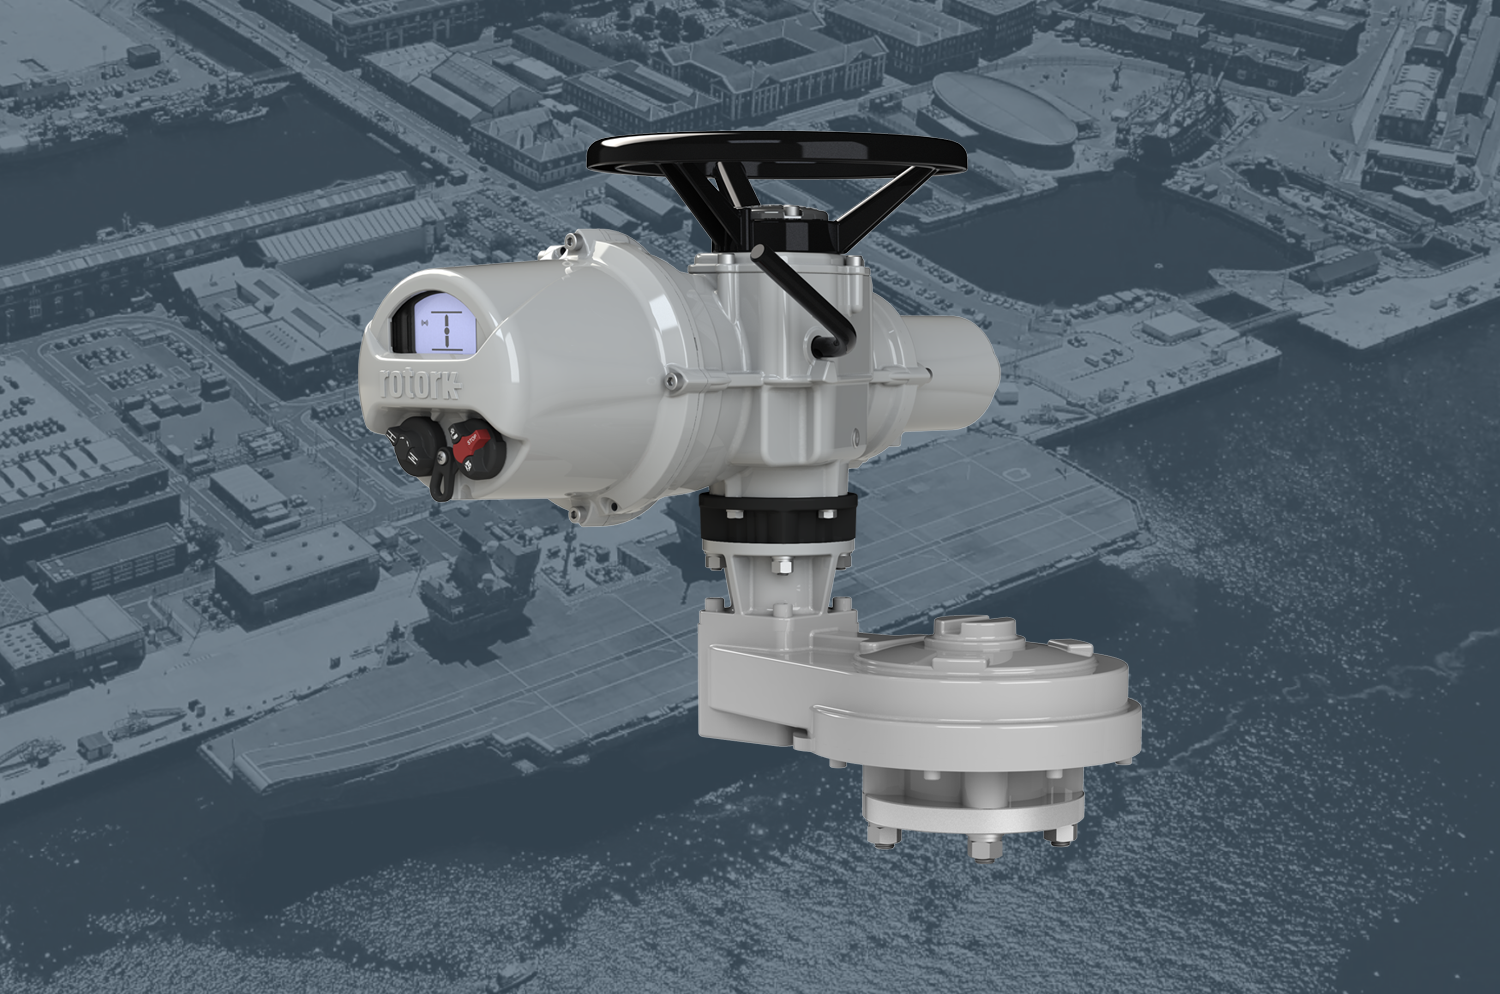 Rotork's IQ3 actuators were chosen and had to be specially adapted by Rotork to overcome problems around confined spaces and difficult access.